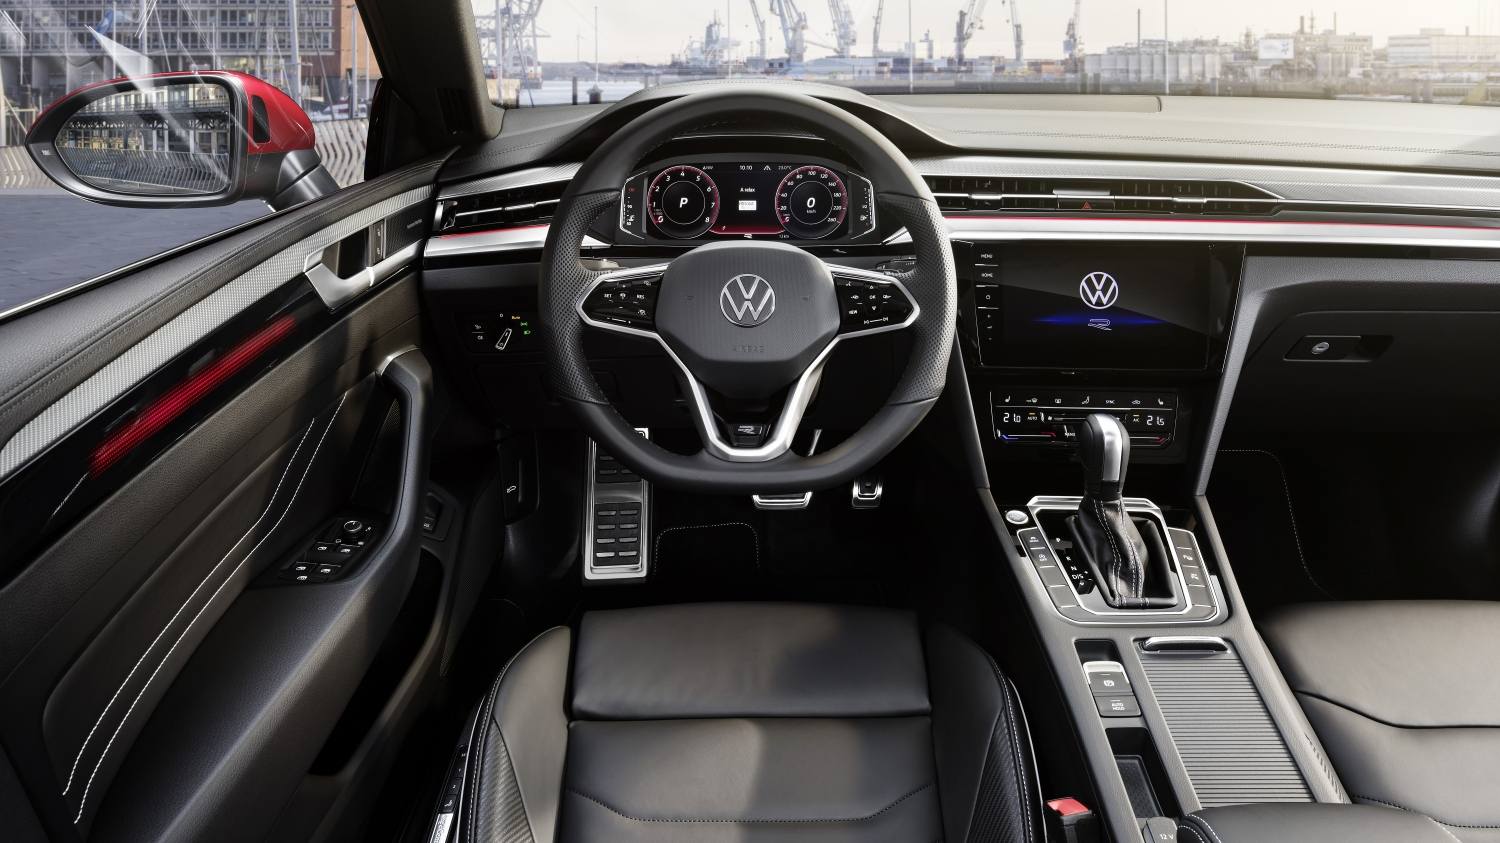 new on the 2021 Volkswagen Updates and